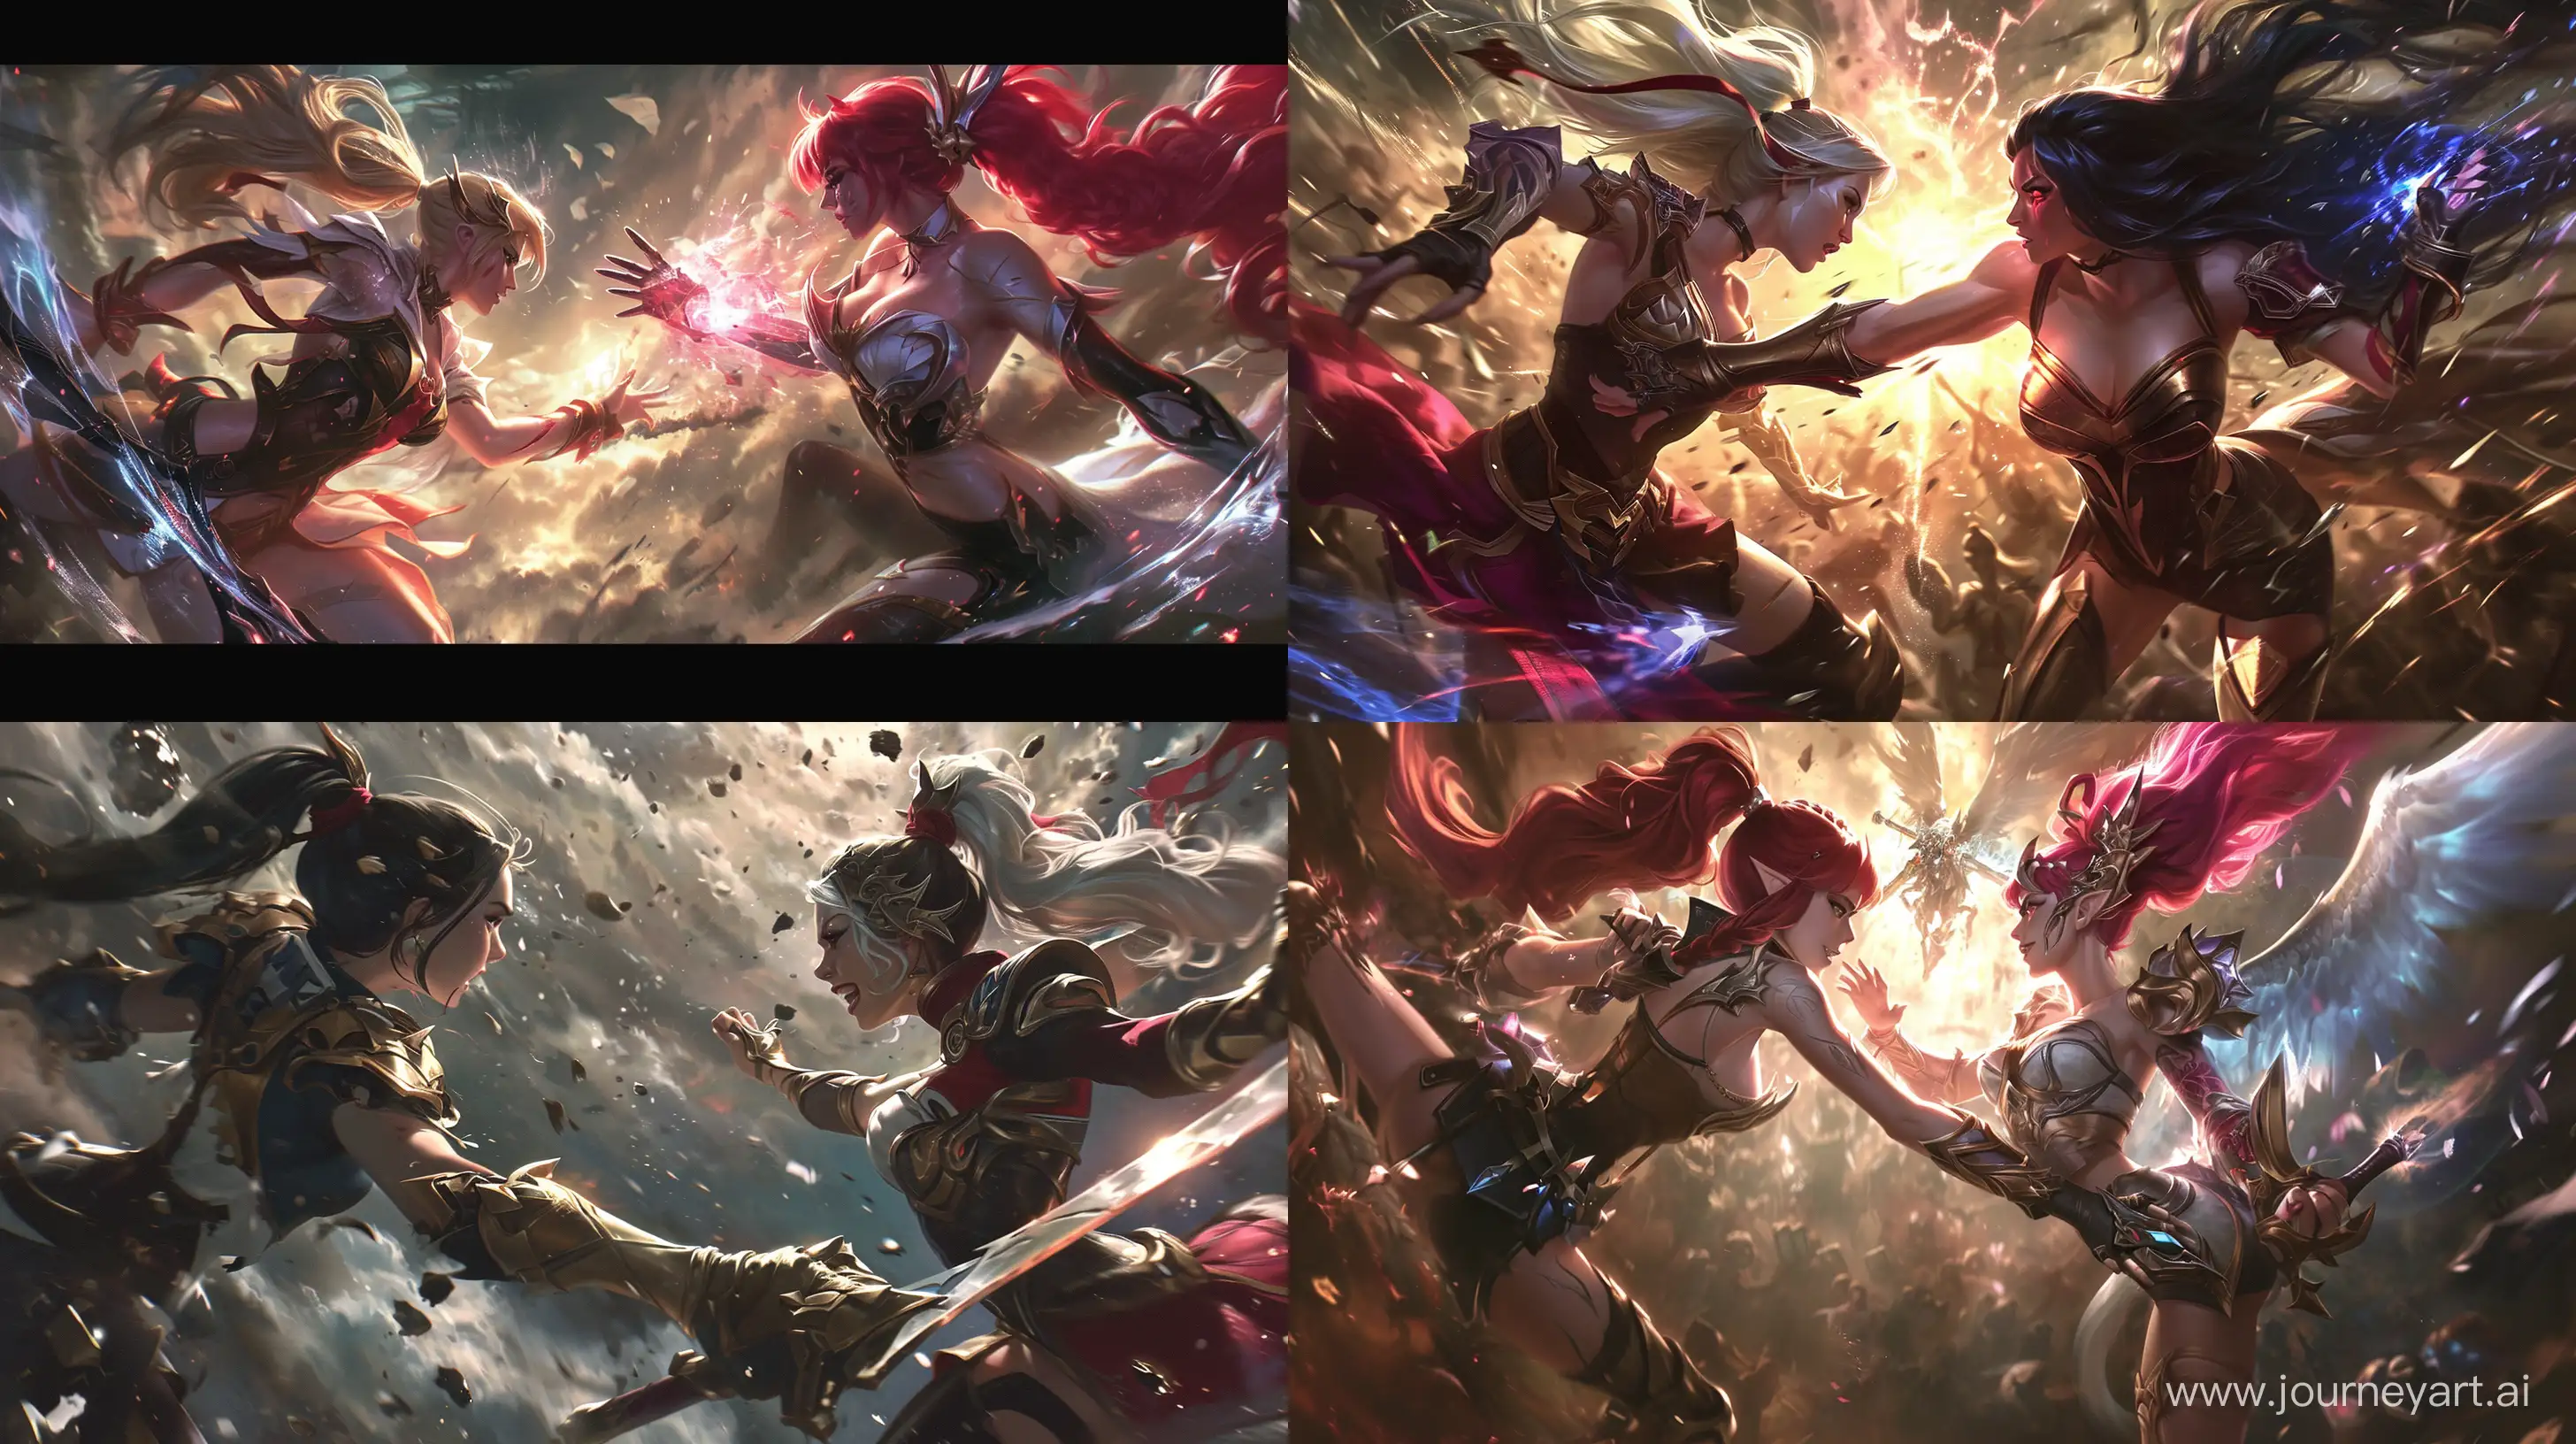 Epic-Battle-of-Two-Female-Characters-in-Stunning-League-of-Legends-Splash-Art